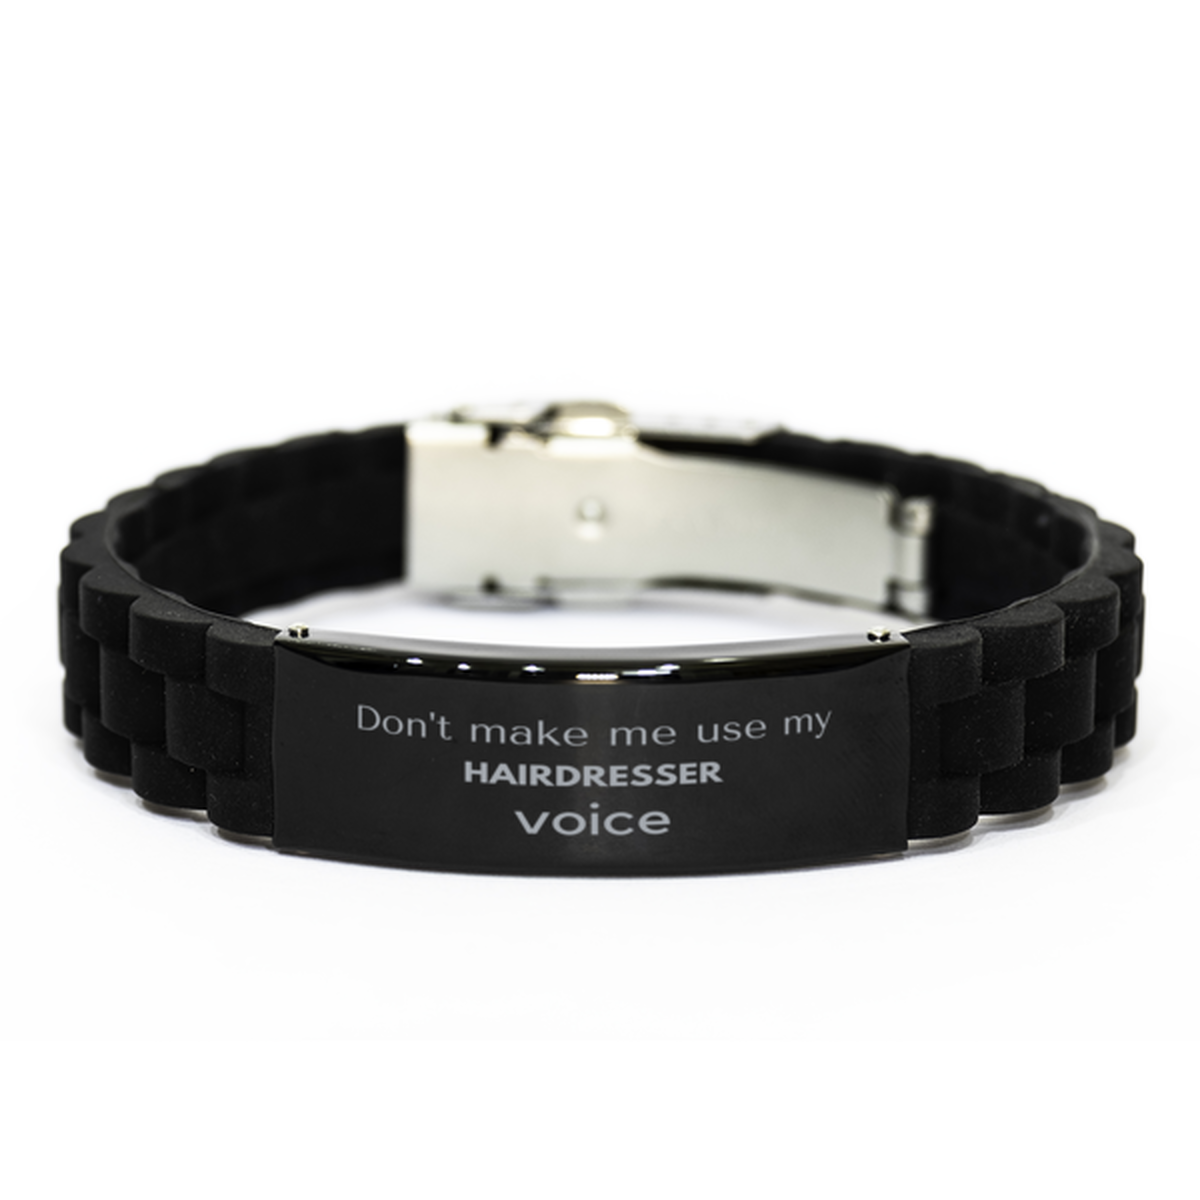 Don't make me use my Hairdresser voice, Sarcasm Hairdresser Gifts, Christmas Hairdresser Black Glidelock Clasp Bracelet Birthday Unique Gifts For Hairdresser Coworkers, Men, Women, Colleague, Friends